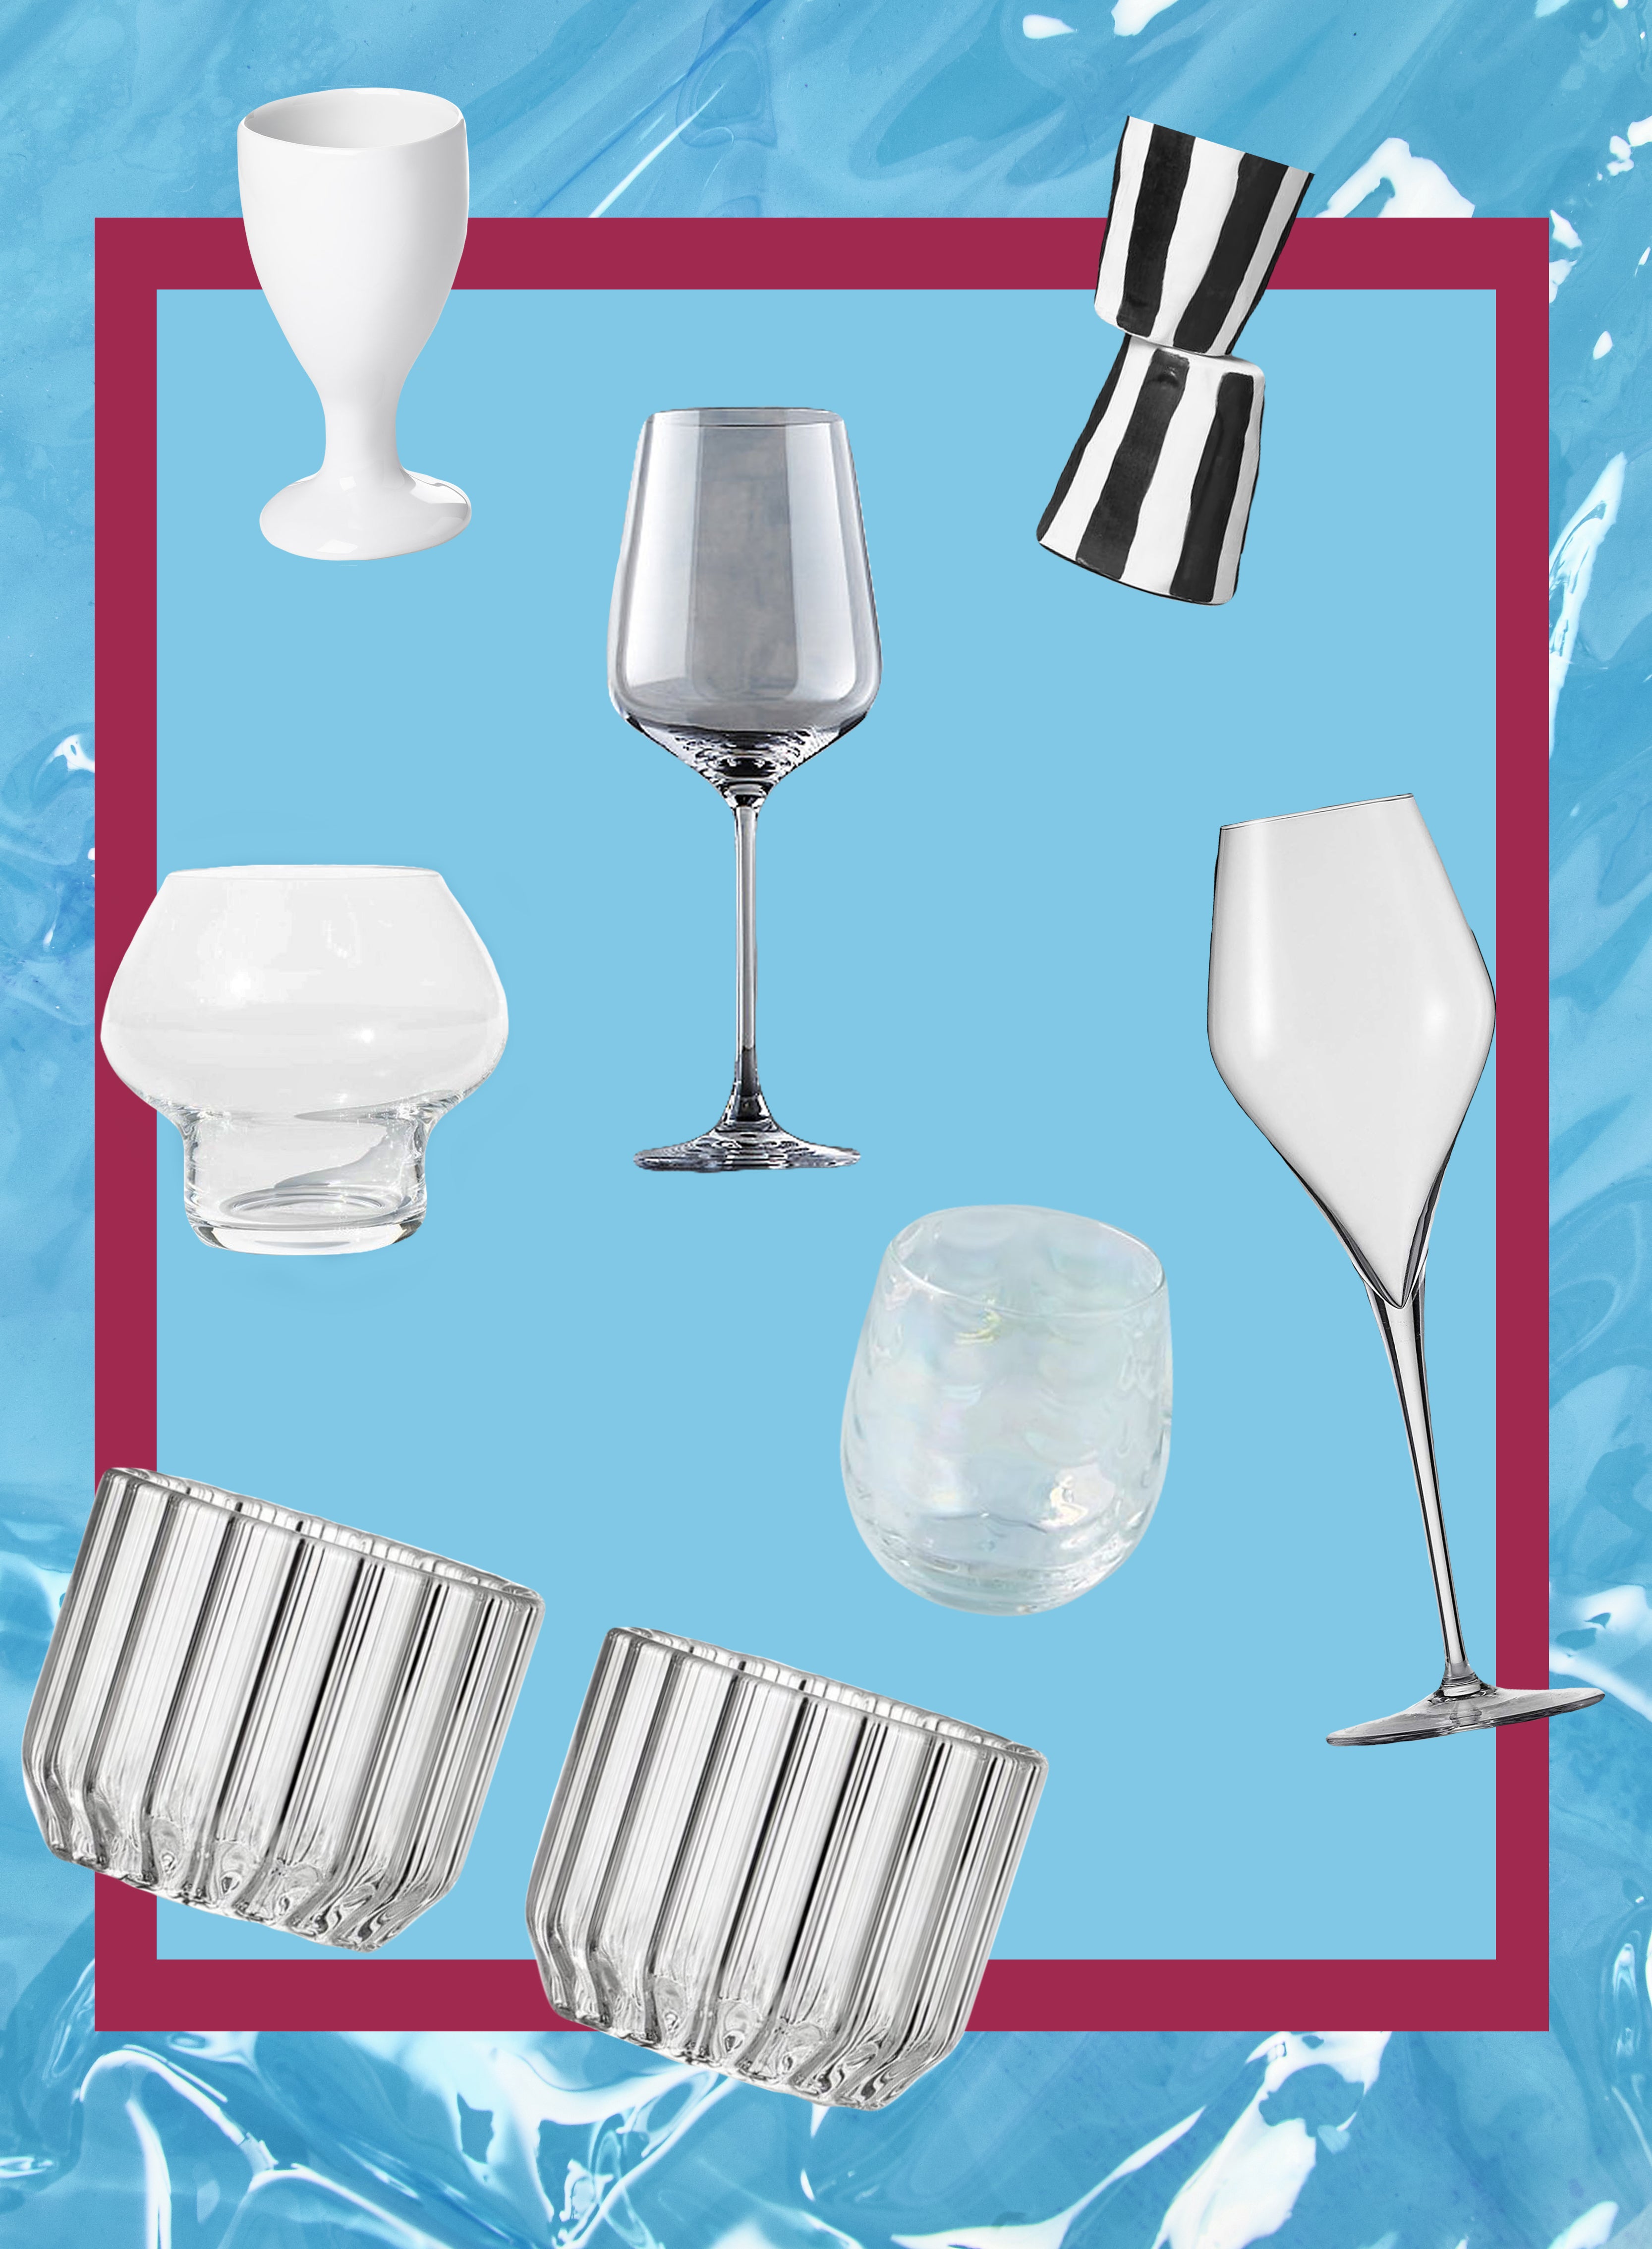 The Best Wine Glasses (and Wines to Pair), According to 11 Wine Experts